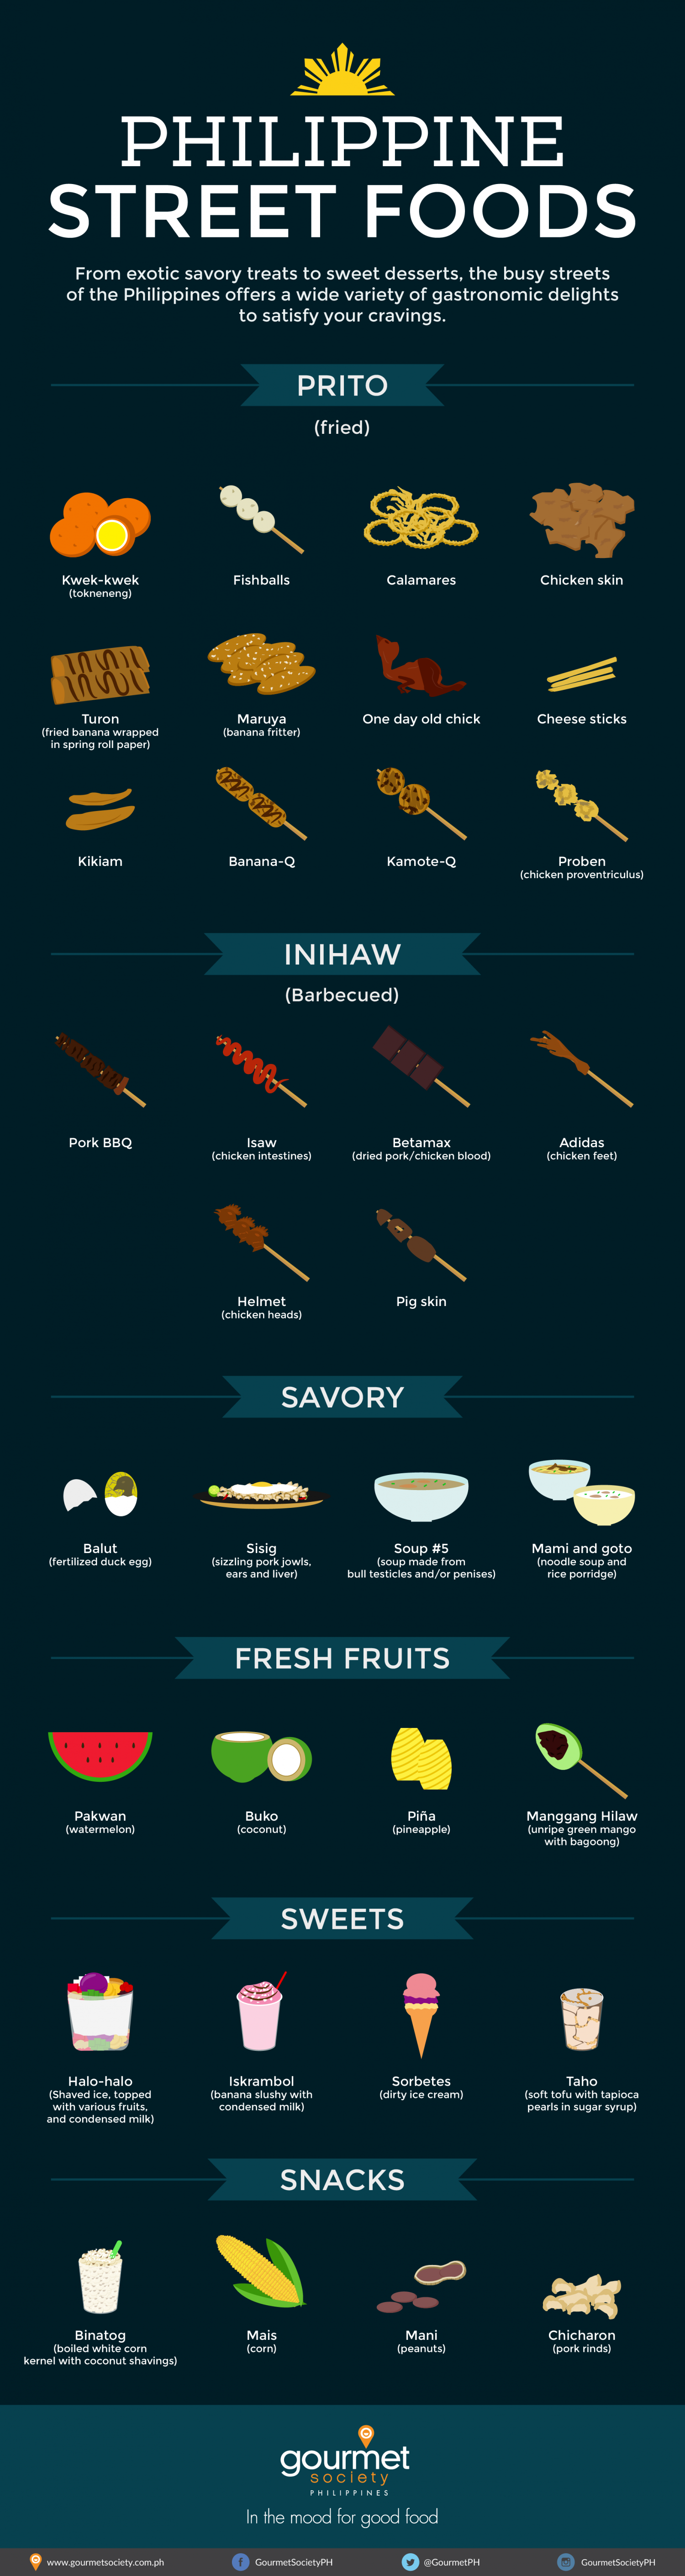 Philippine Street Food Guide Infographic